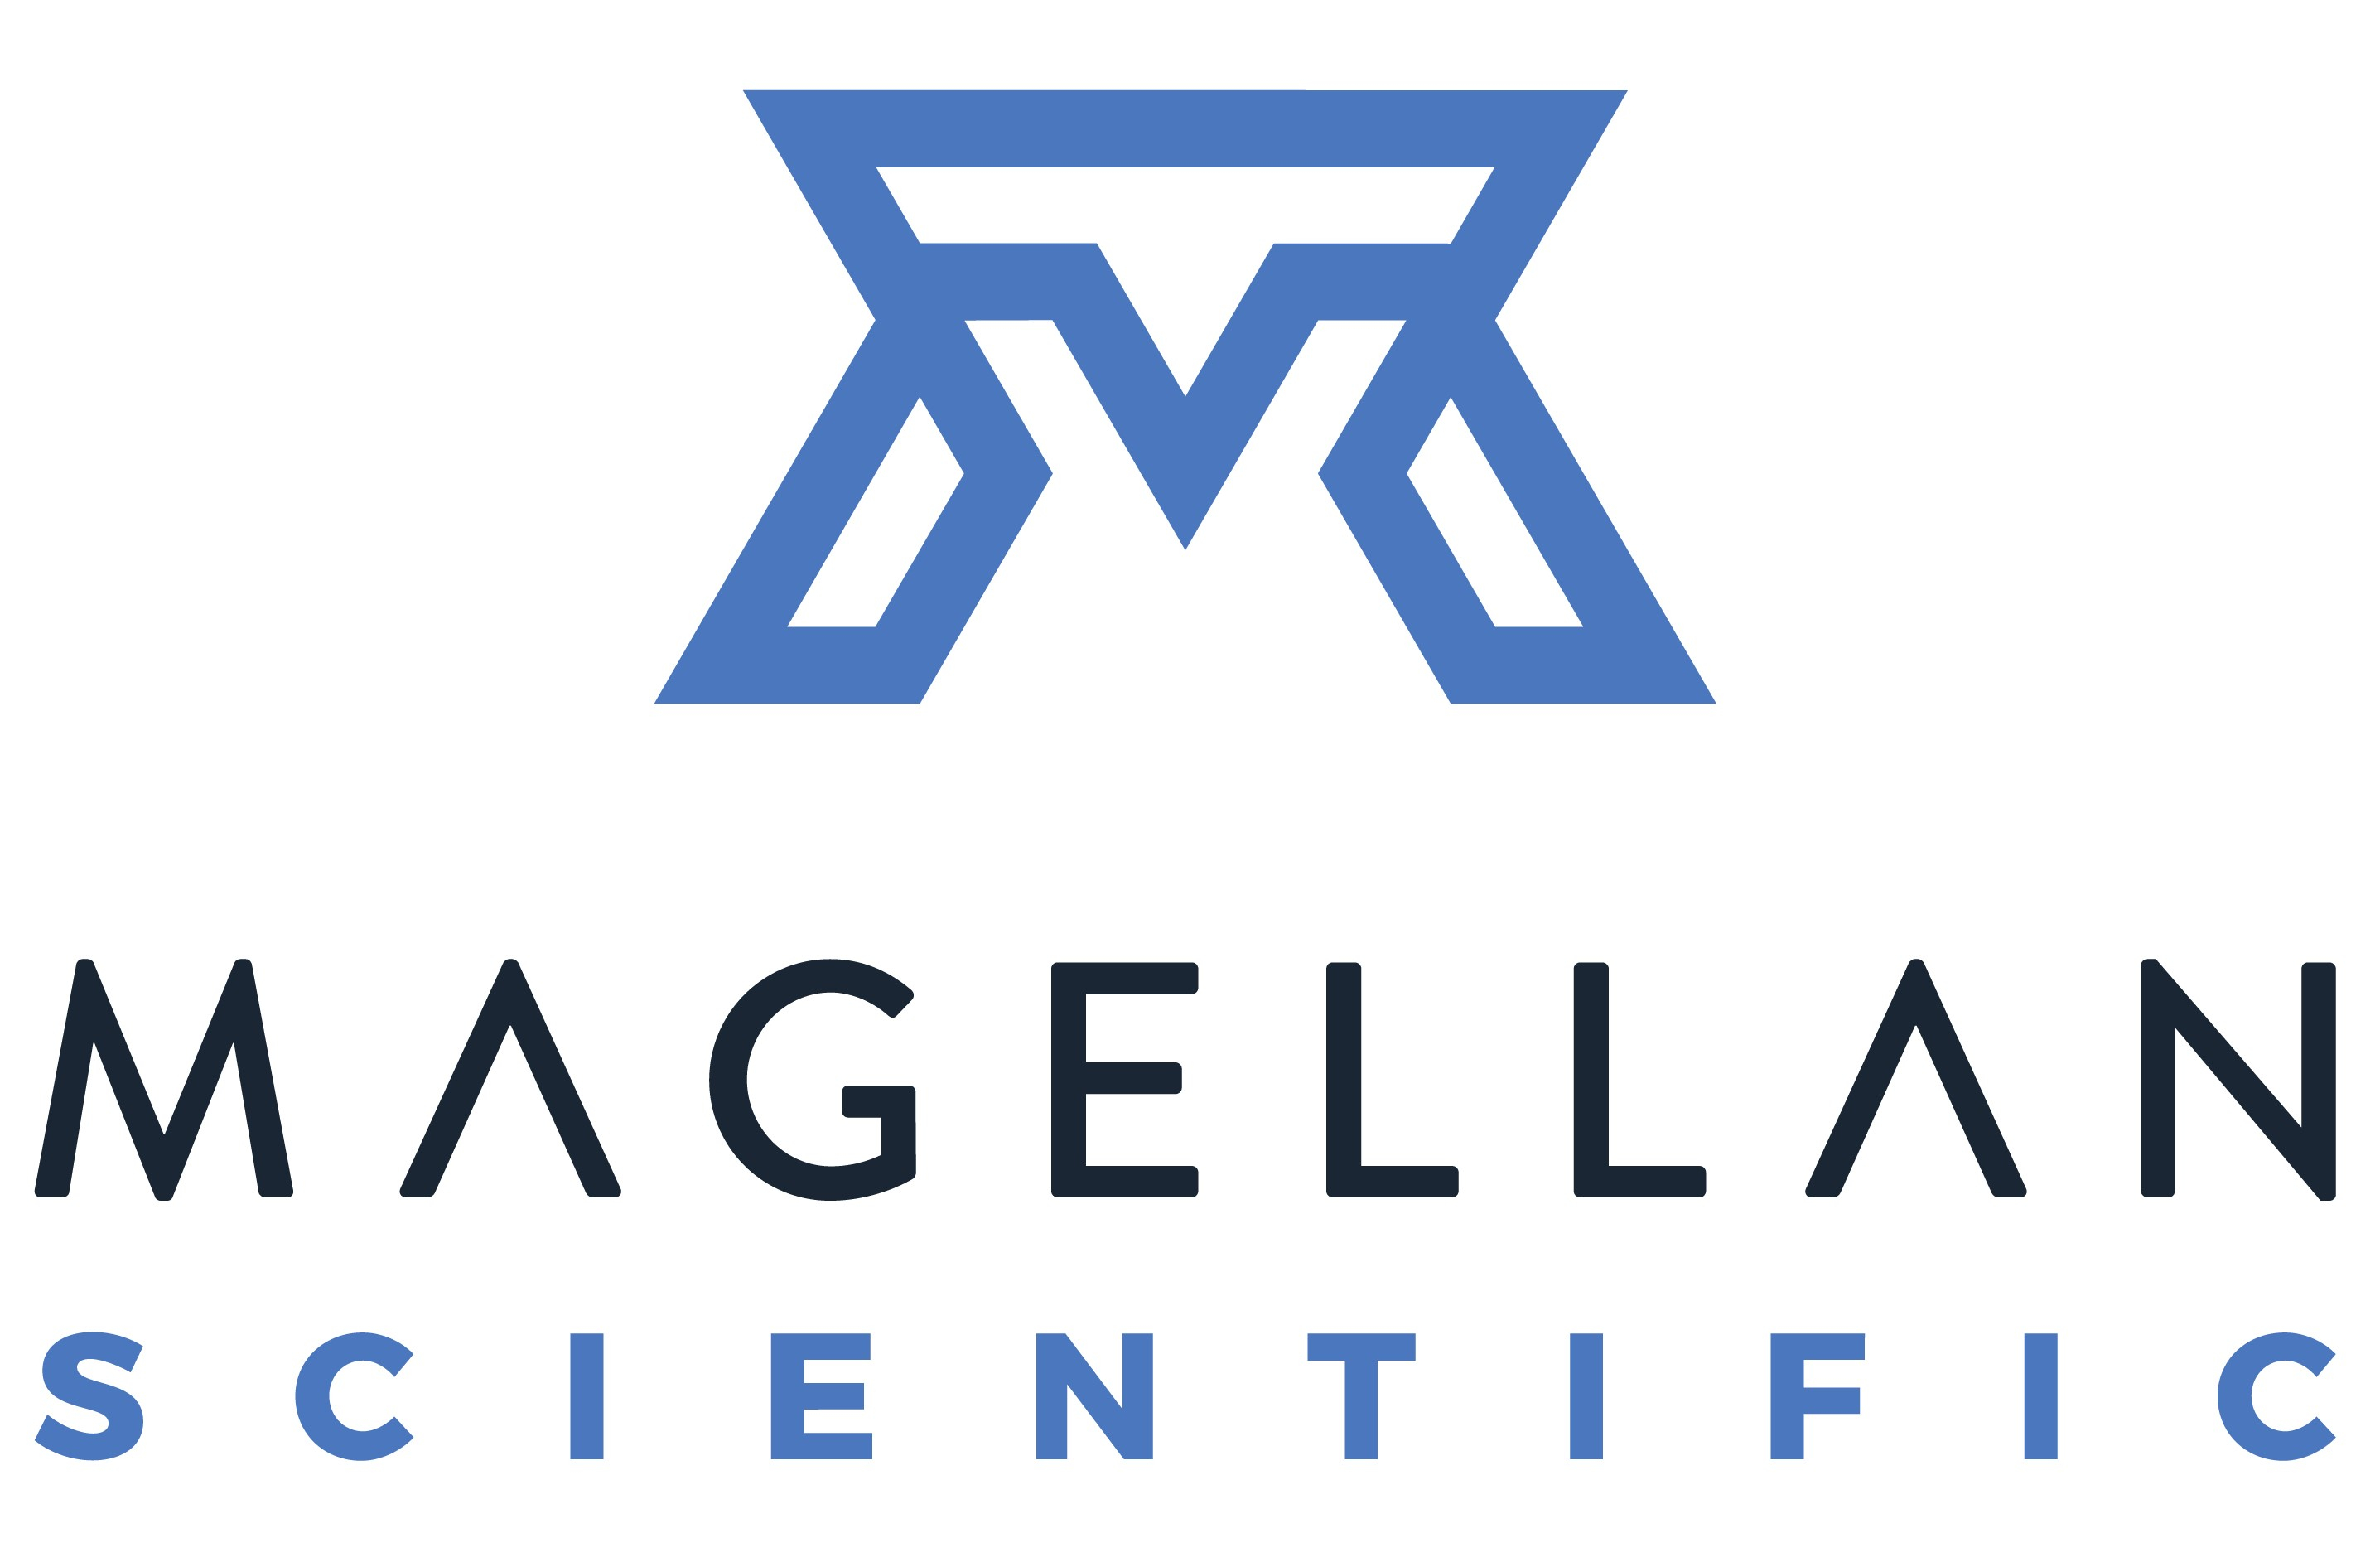 Magellan Scientific and Anax Power Sign Multi-Year, $12M Partnership to  Mine Bitcoin Using the 500kW Anax Turboexpanders | Business Wire